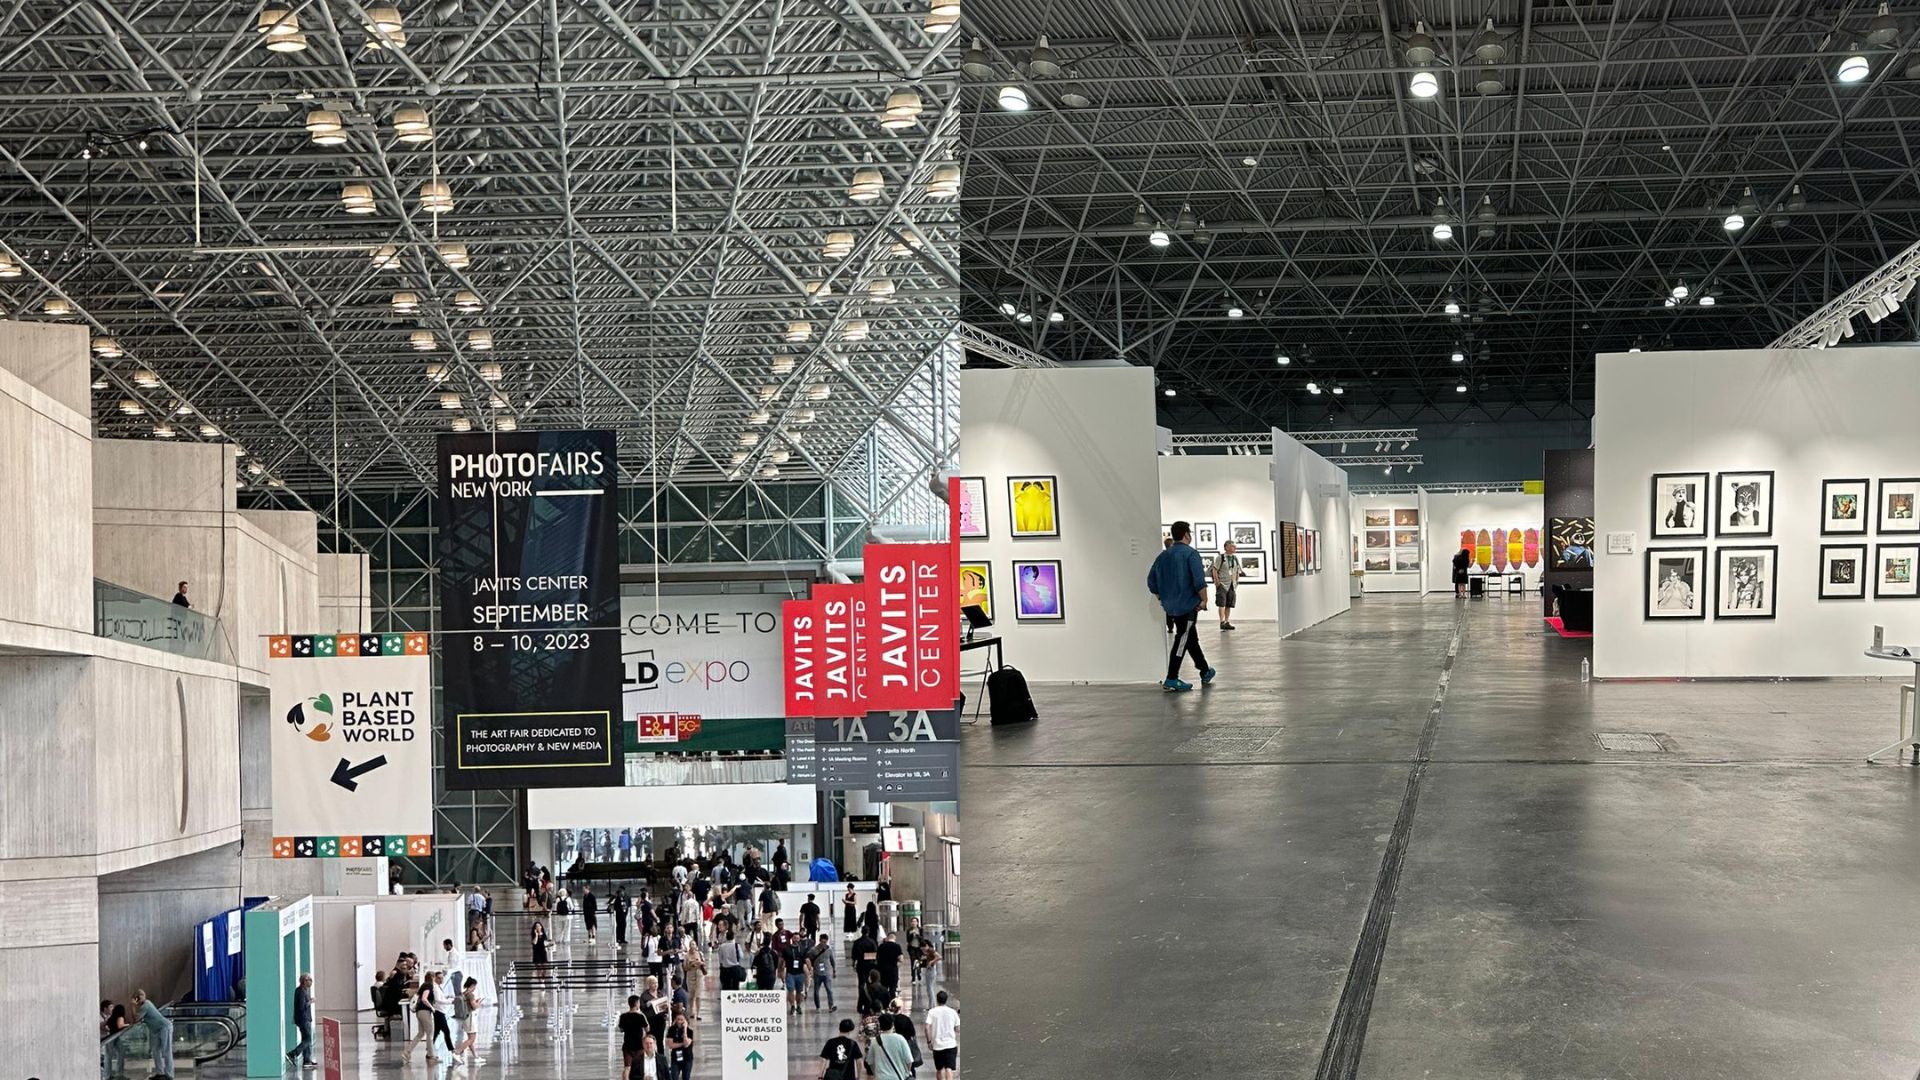 PHOTOFAIRS New York 2023 Opens this Friday at the Javits Center